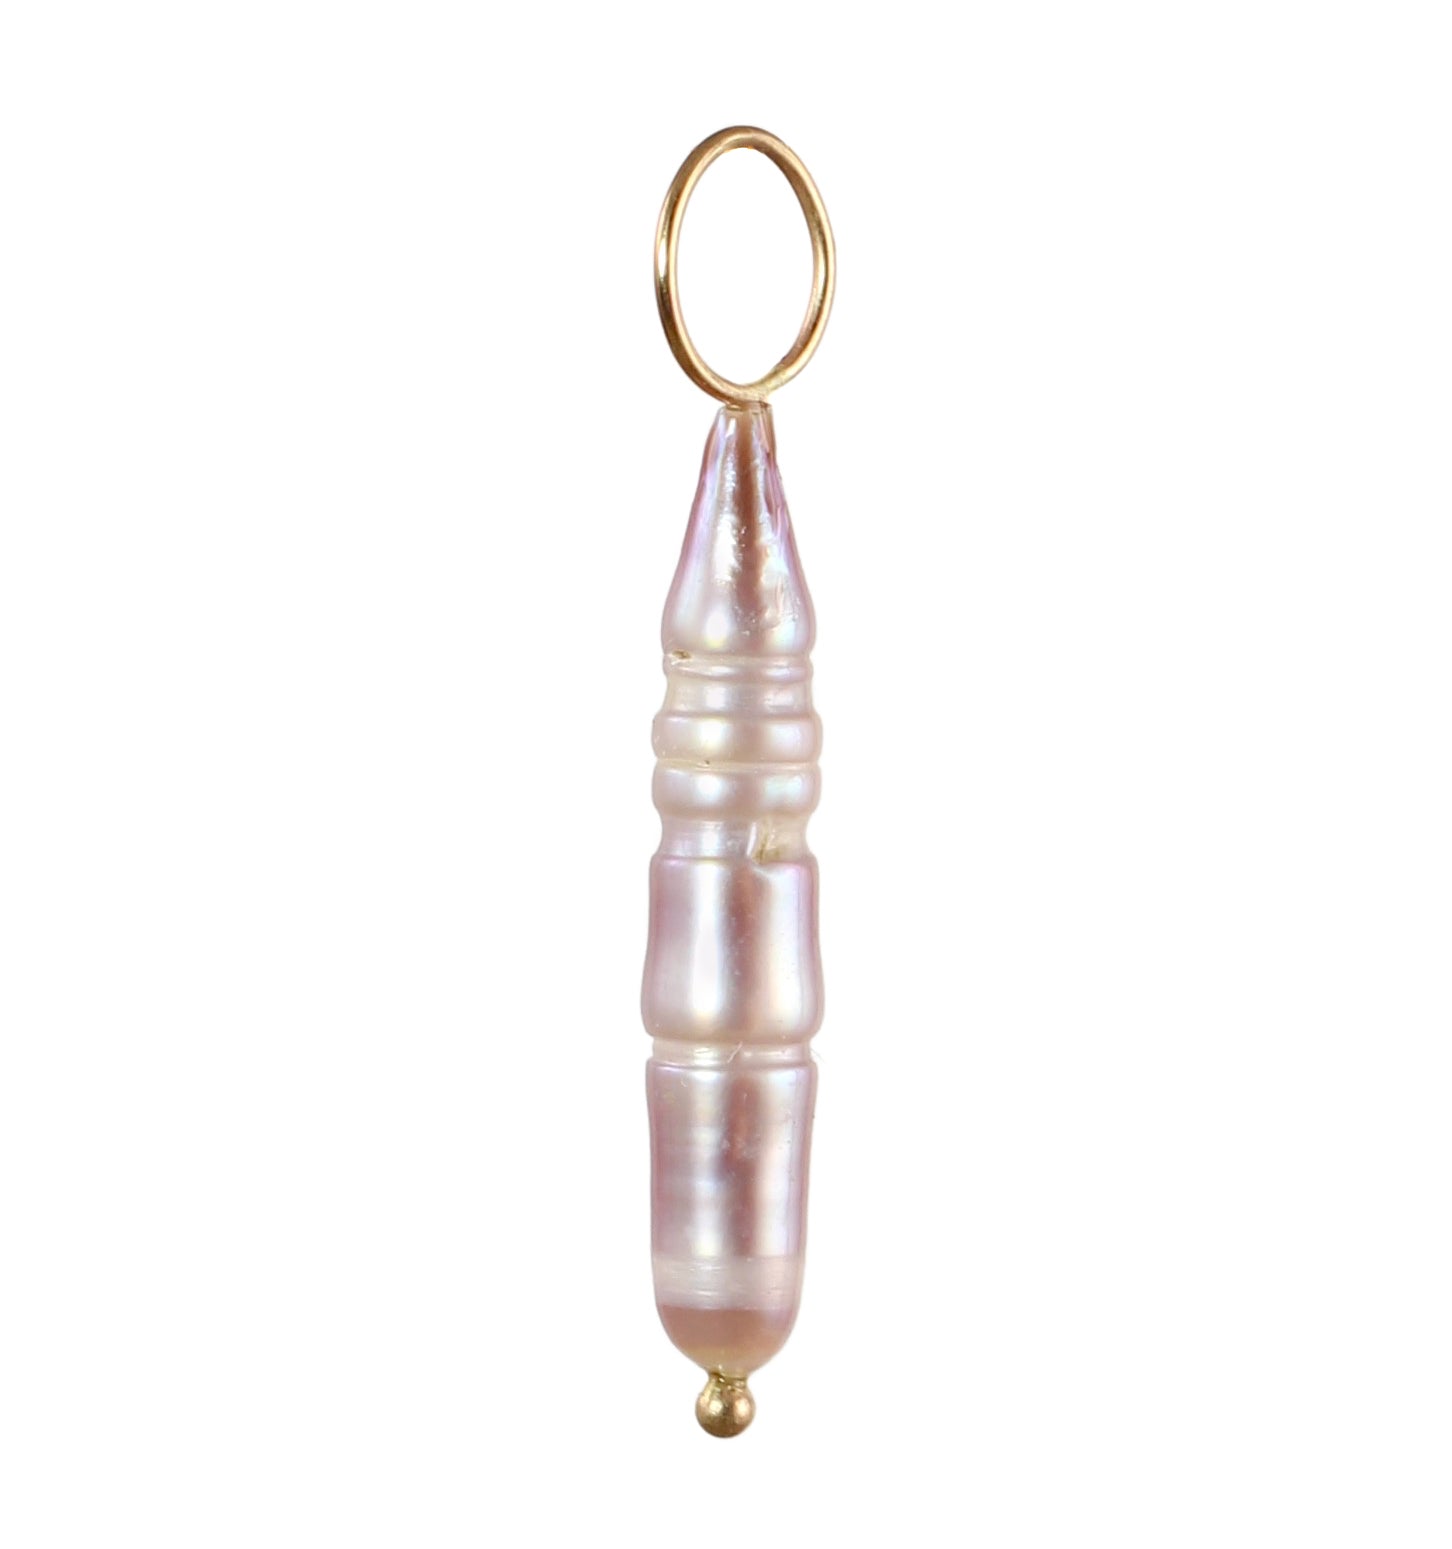 Lavender Stick Pearl Charm in 14k Gold - Limited Edition